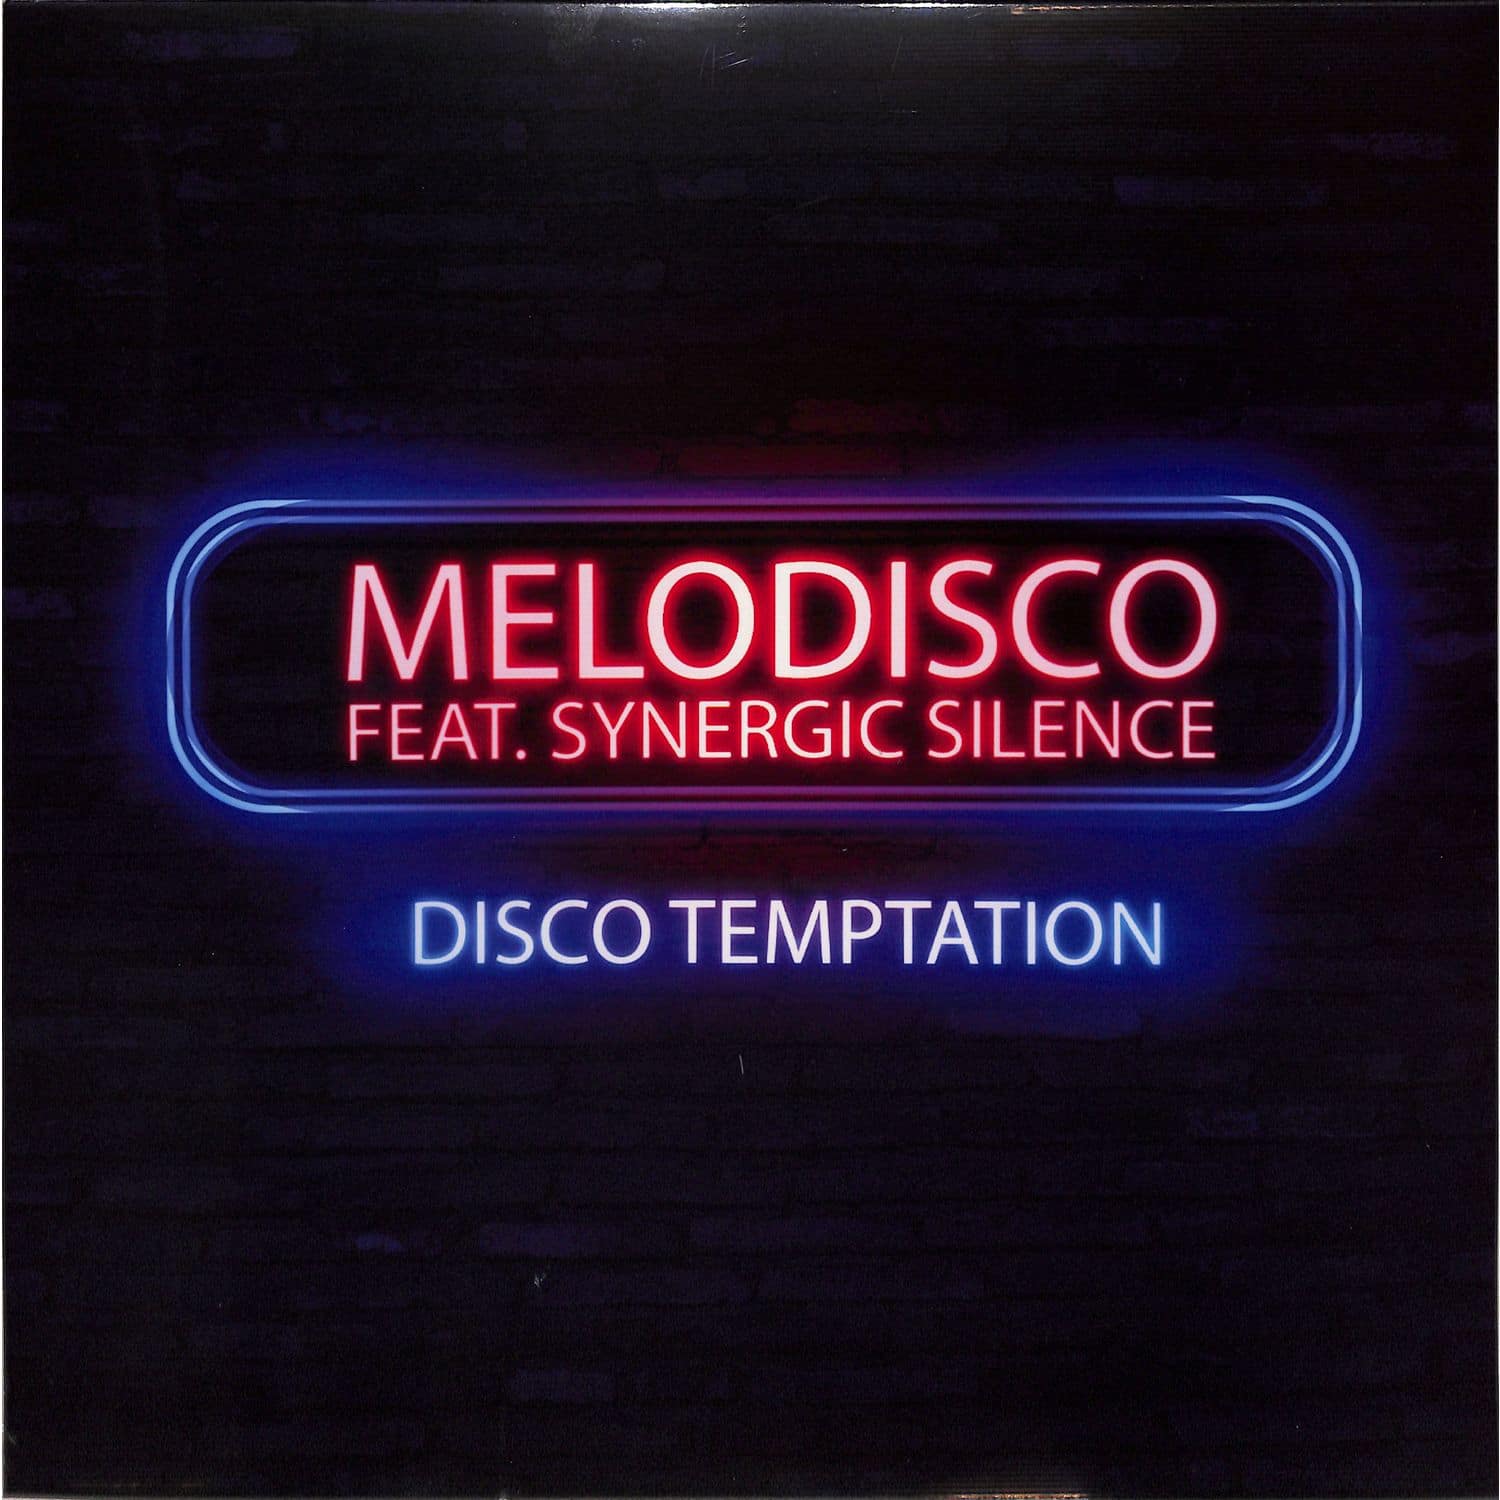 Melodisco Feat. Synergie Silence - DISCO TEMPTATION